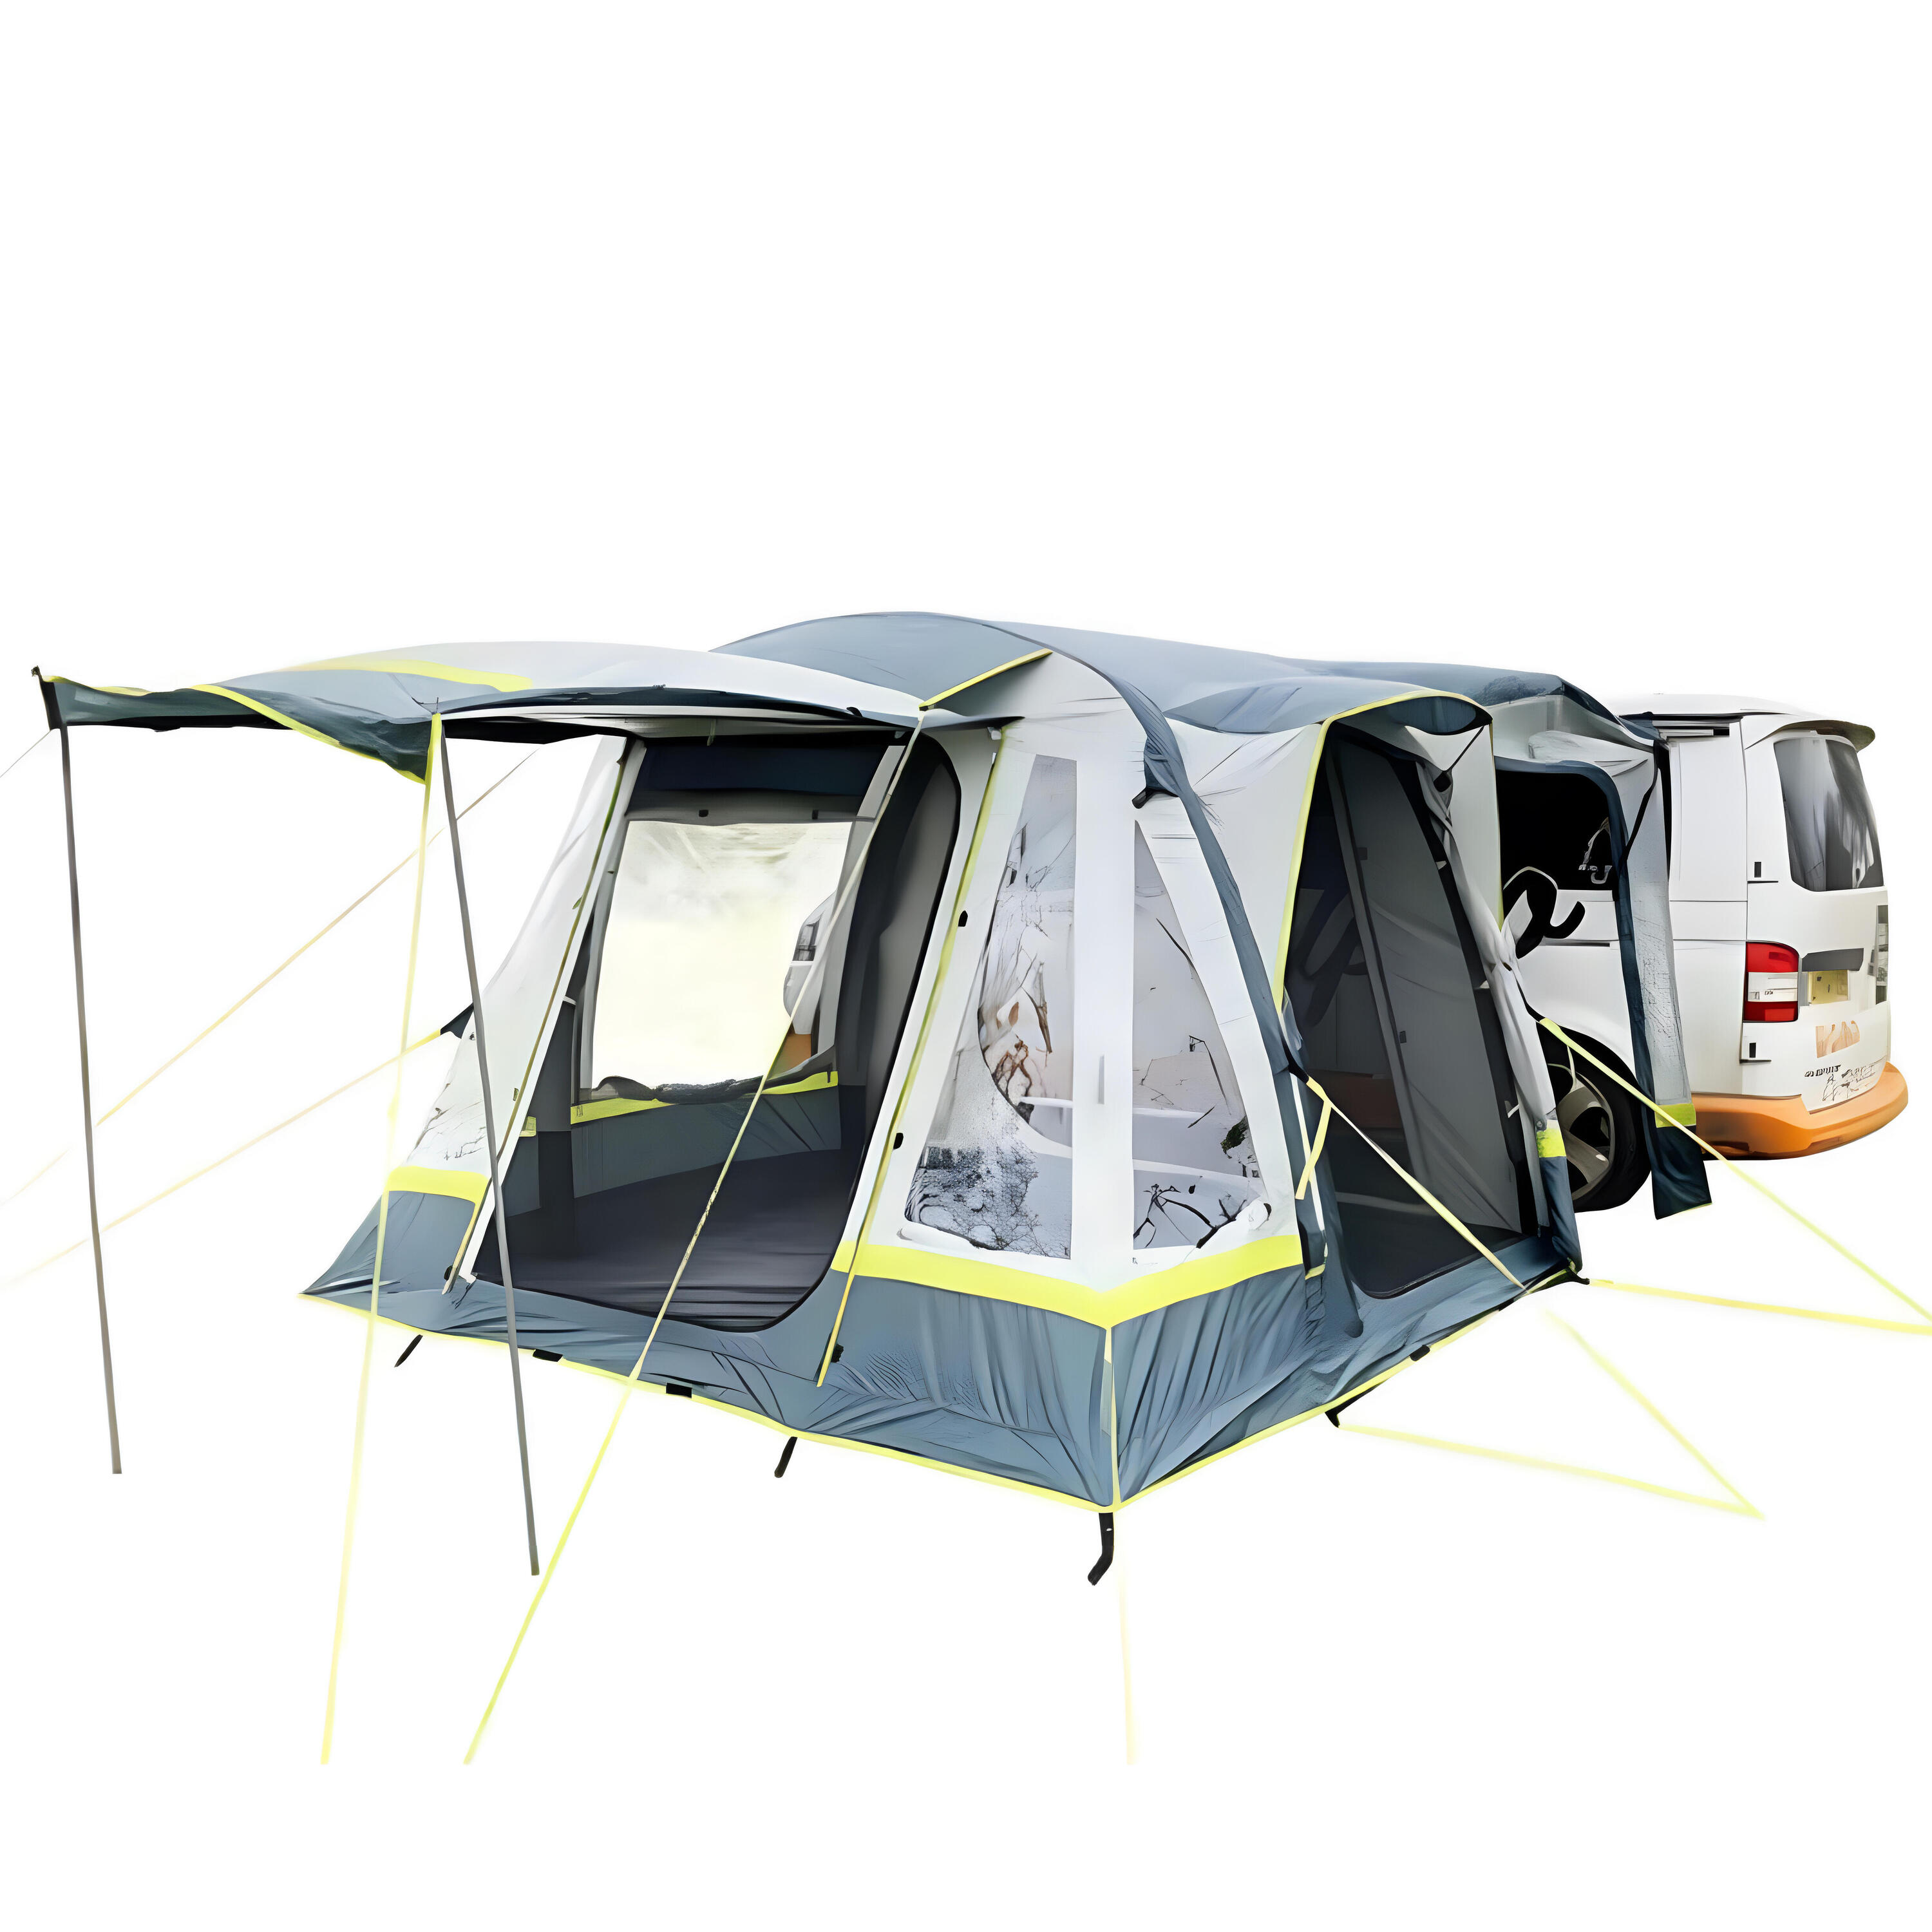 OLPRO Loopo Breeze - Inflatable Campervan Awning - Limited Edition 1/7